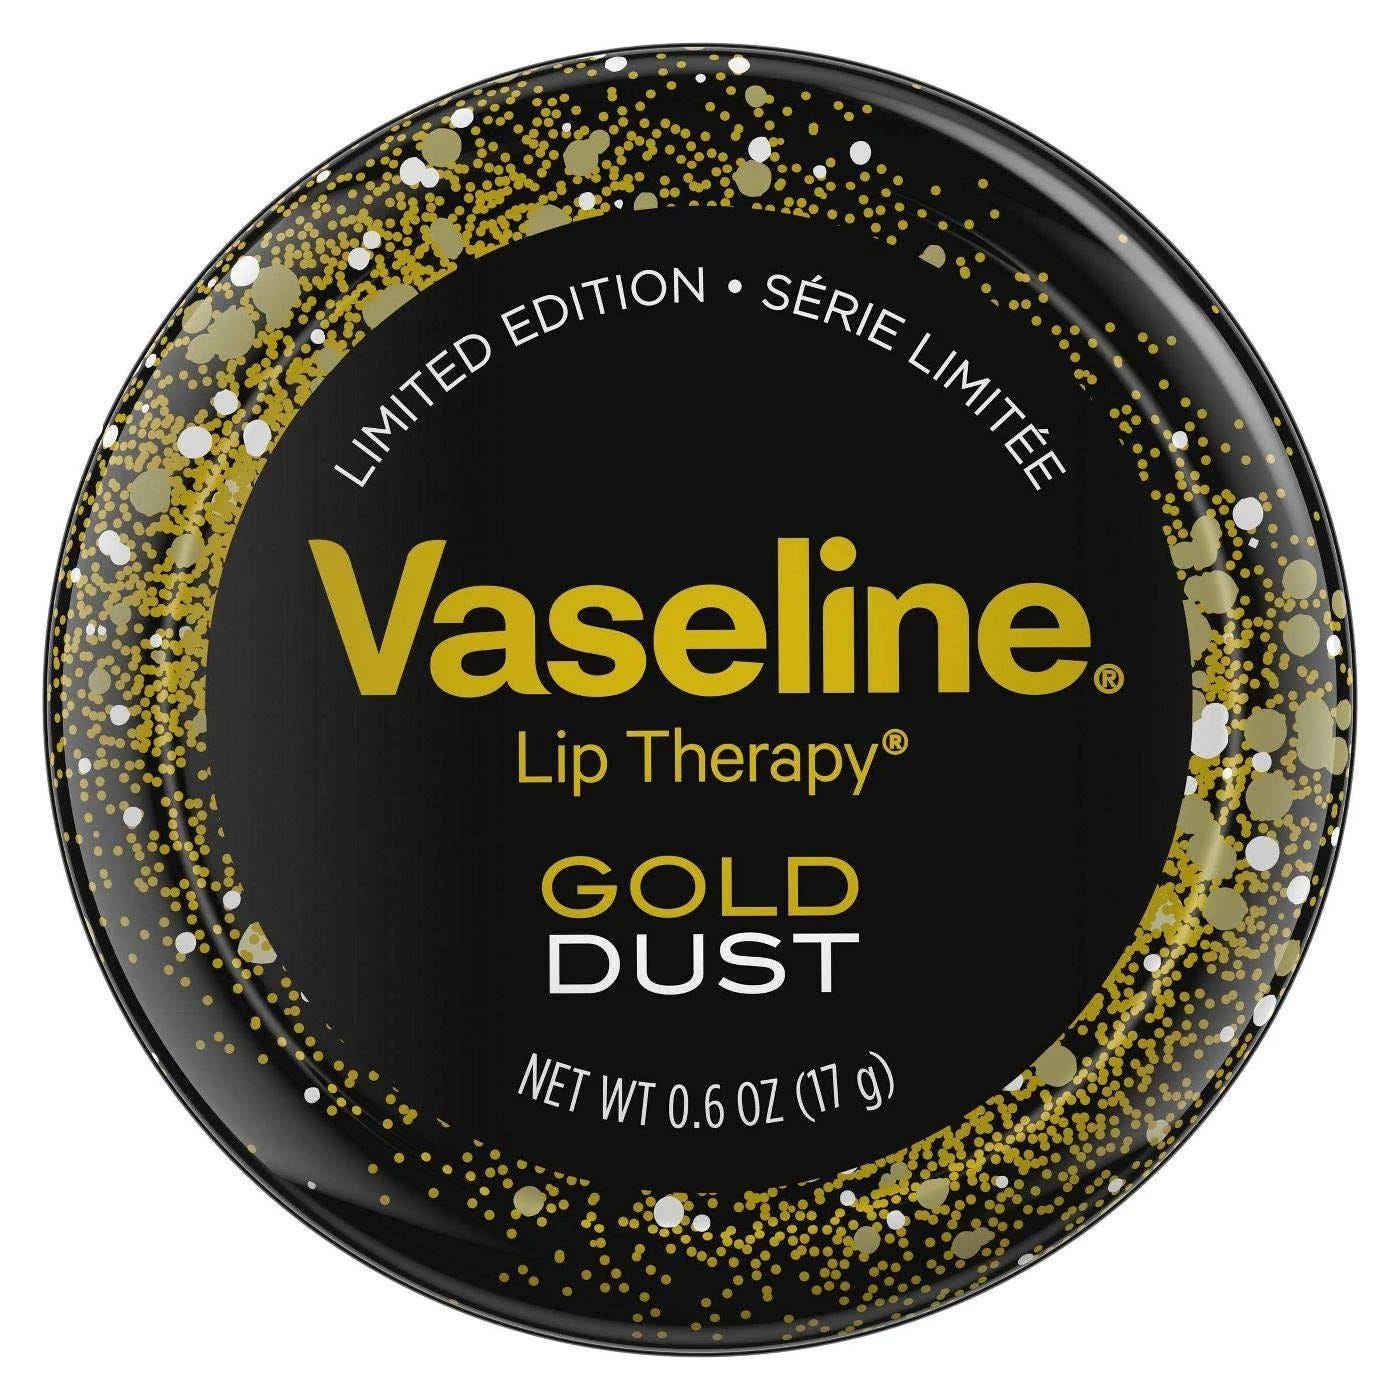 Vaseline Gold Dust Lip Therapy: Long-Lasting Moisture and Protection for Lips | Image